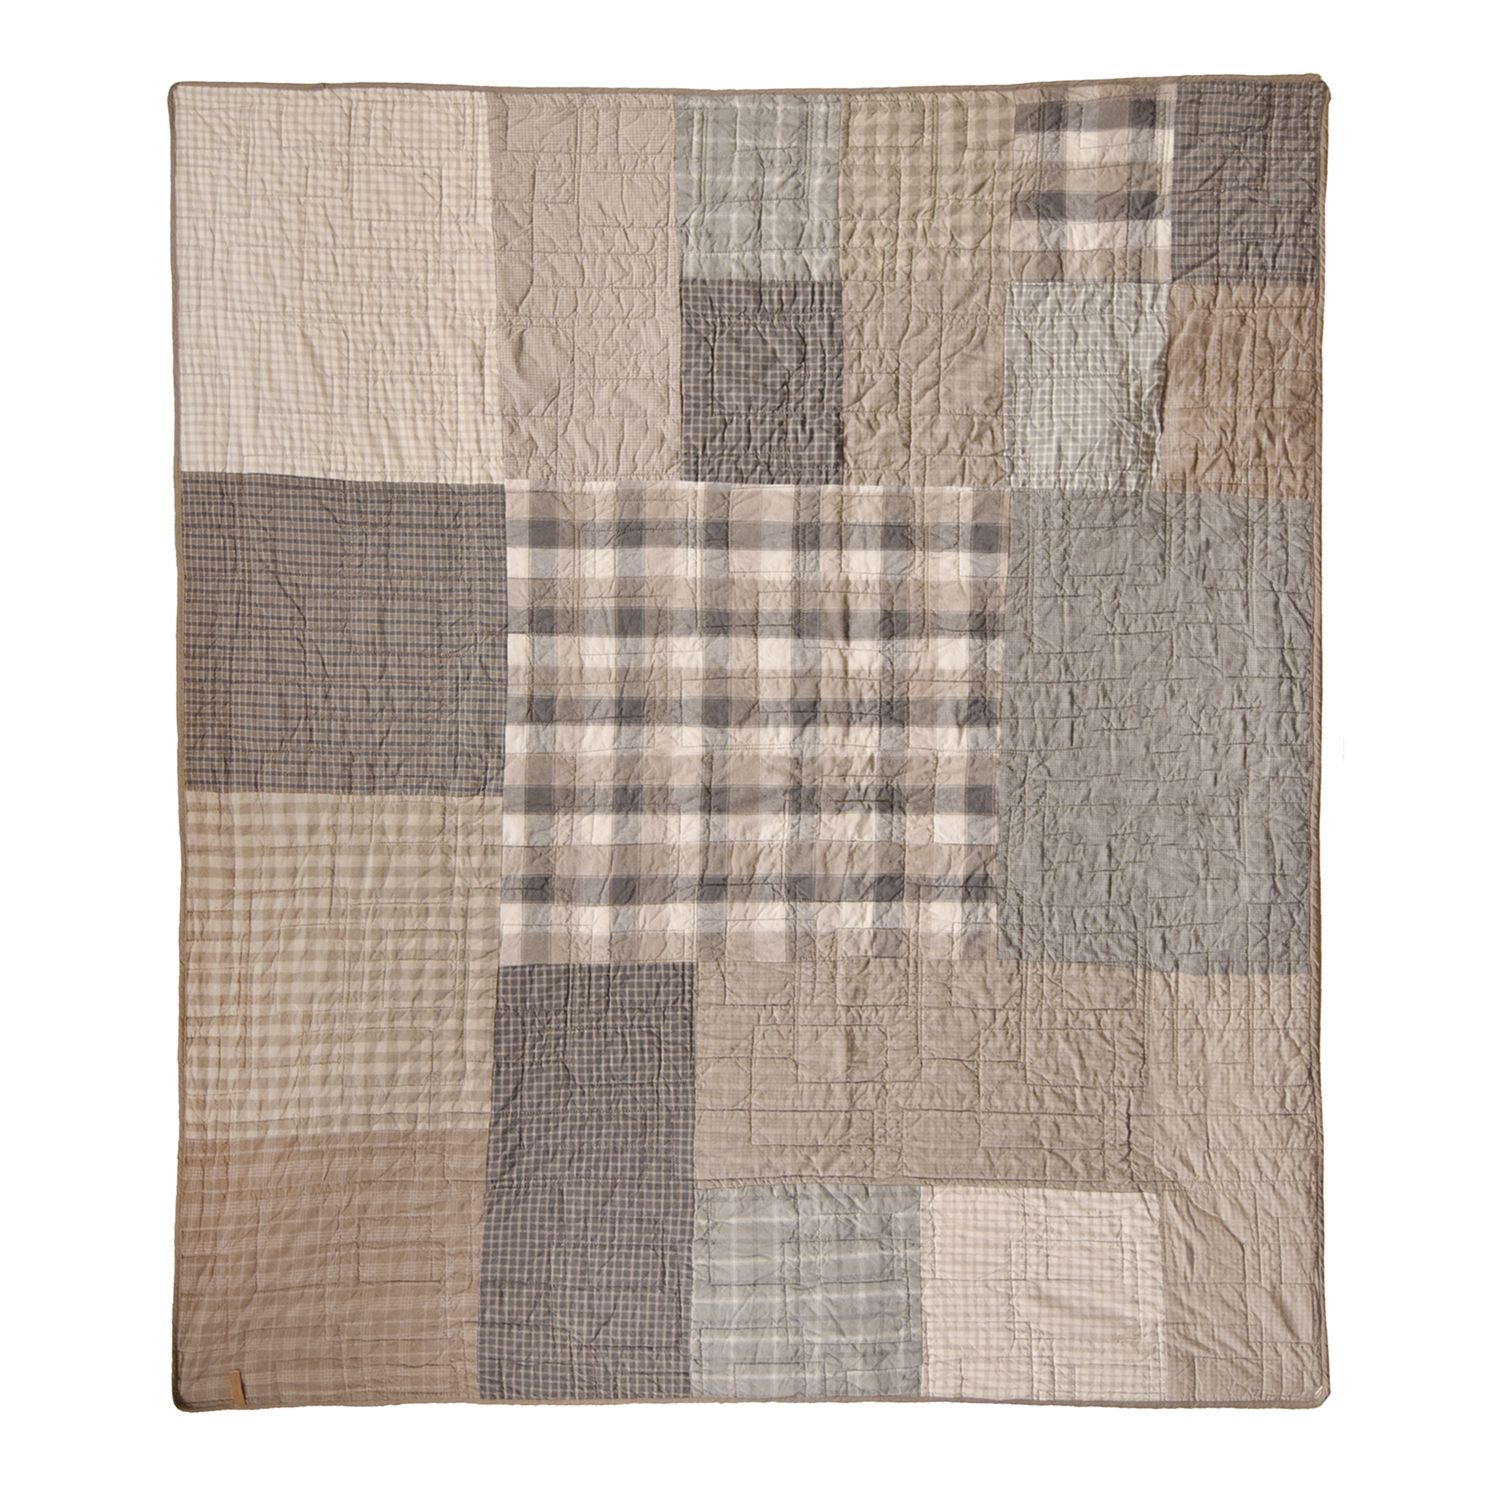 Image for Donna Sharp Smoky Square Throw at Kohl's.